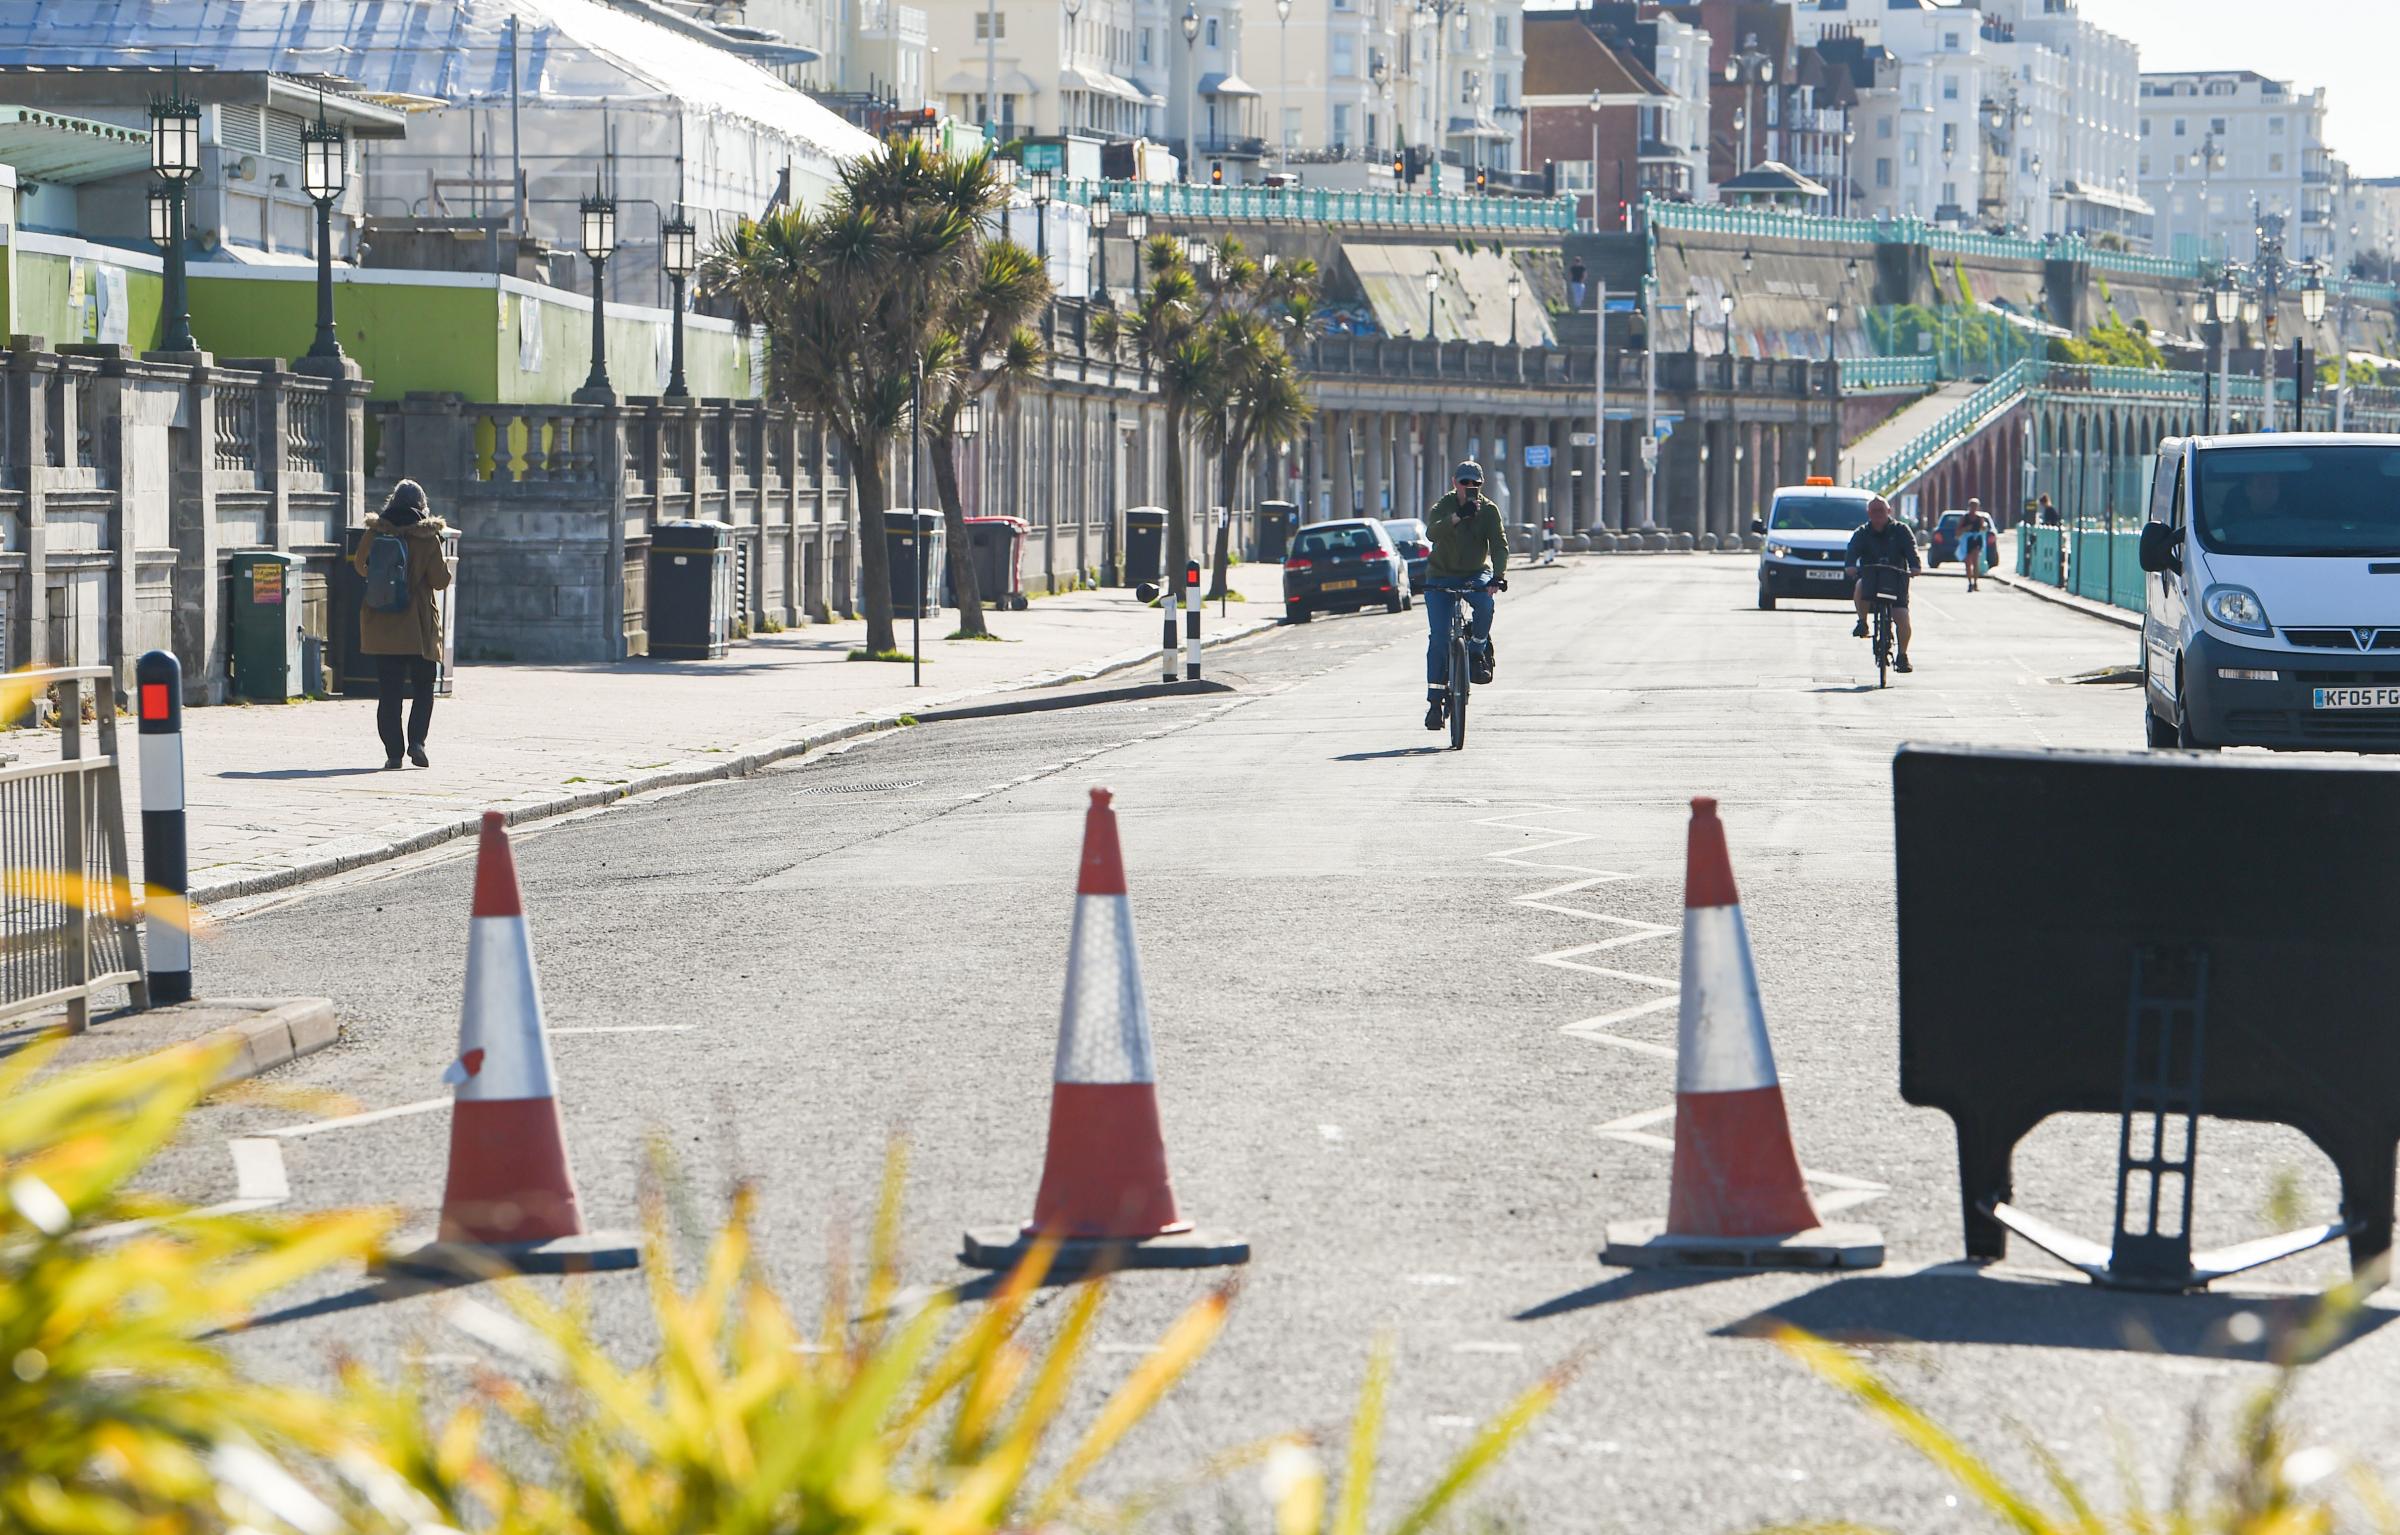 Brighton UK 20th April 2020 - Madeira Drive on Brighton seafront has been closed by the city council to traffic between 8am and 8pm for the next three weeks to allow cyclists and pedestrians to exercise in safer conditions during the Coronavirus COVID-19